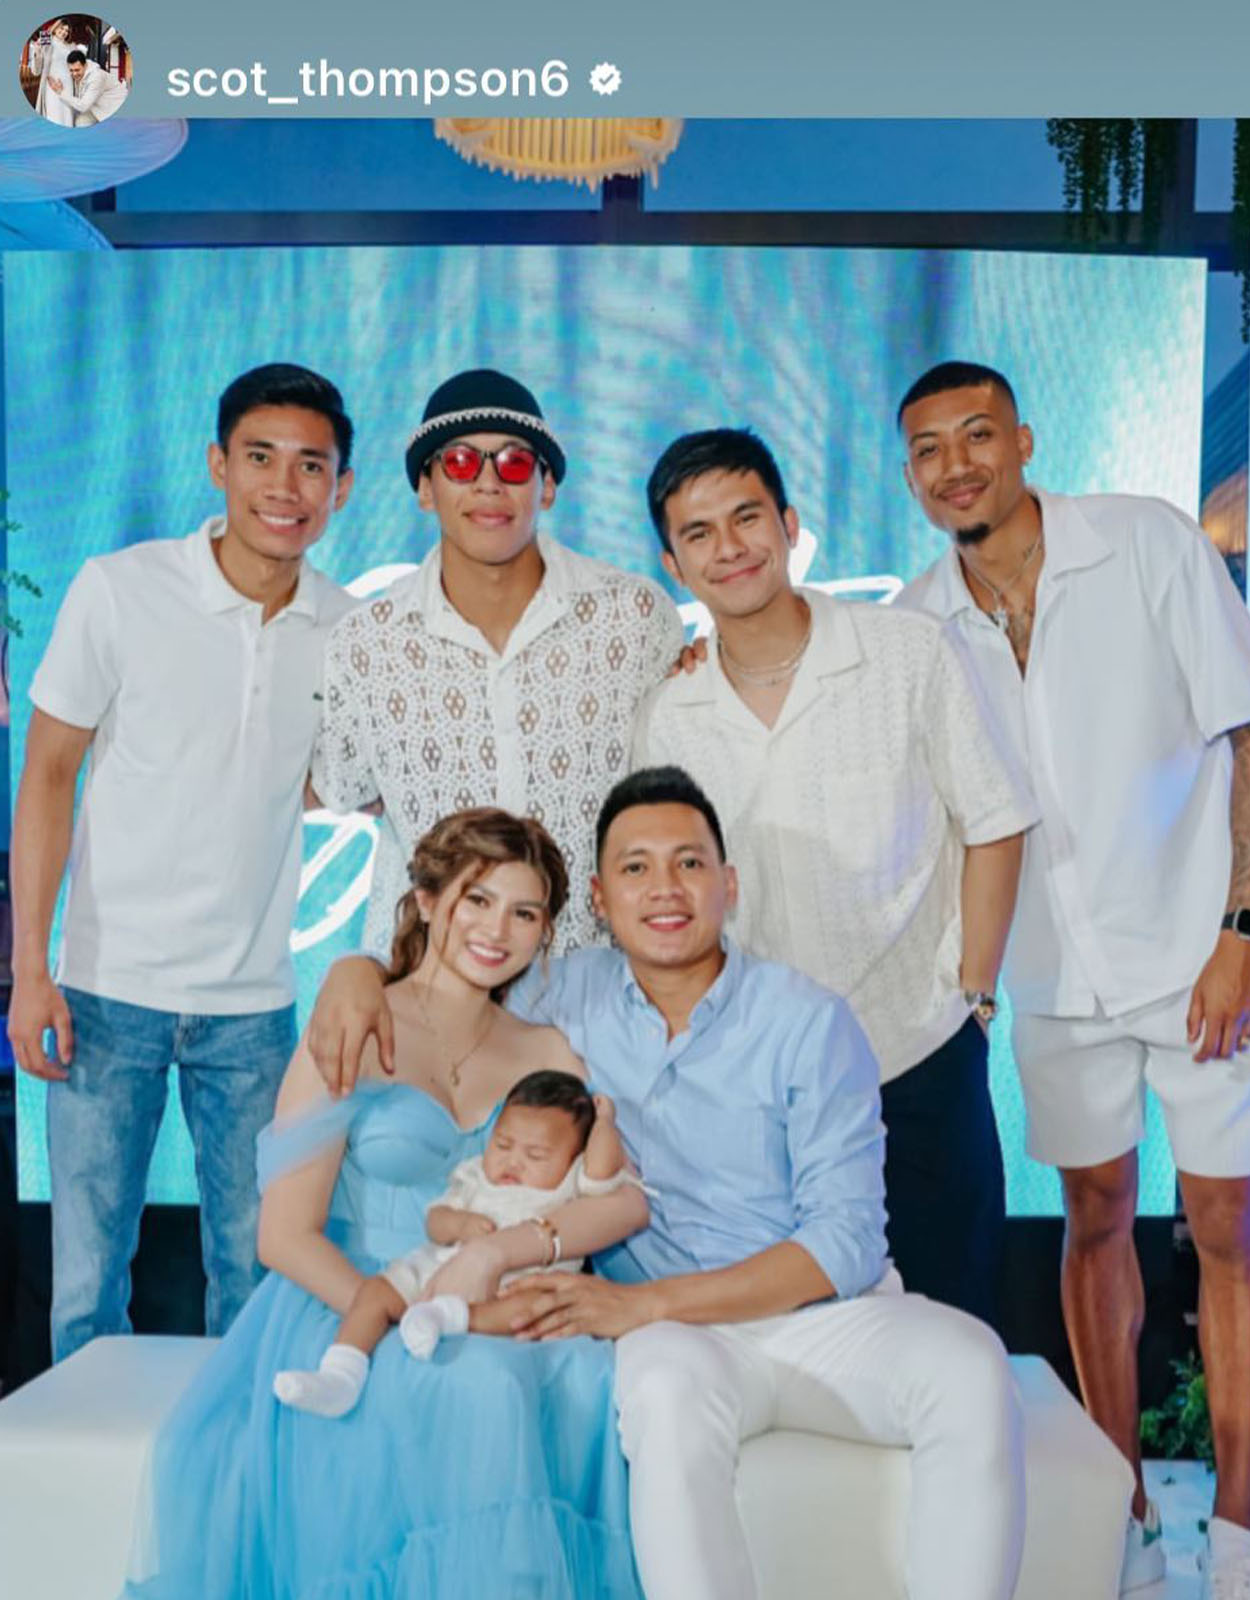 Scottie Thompson Is Going to Be a Dad